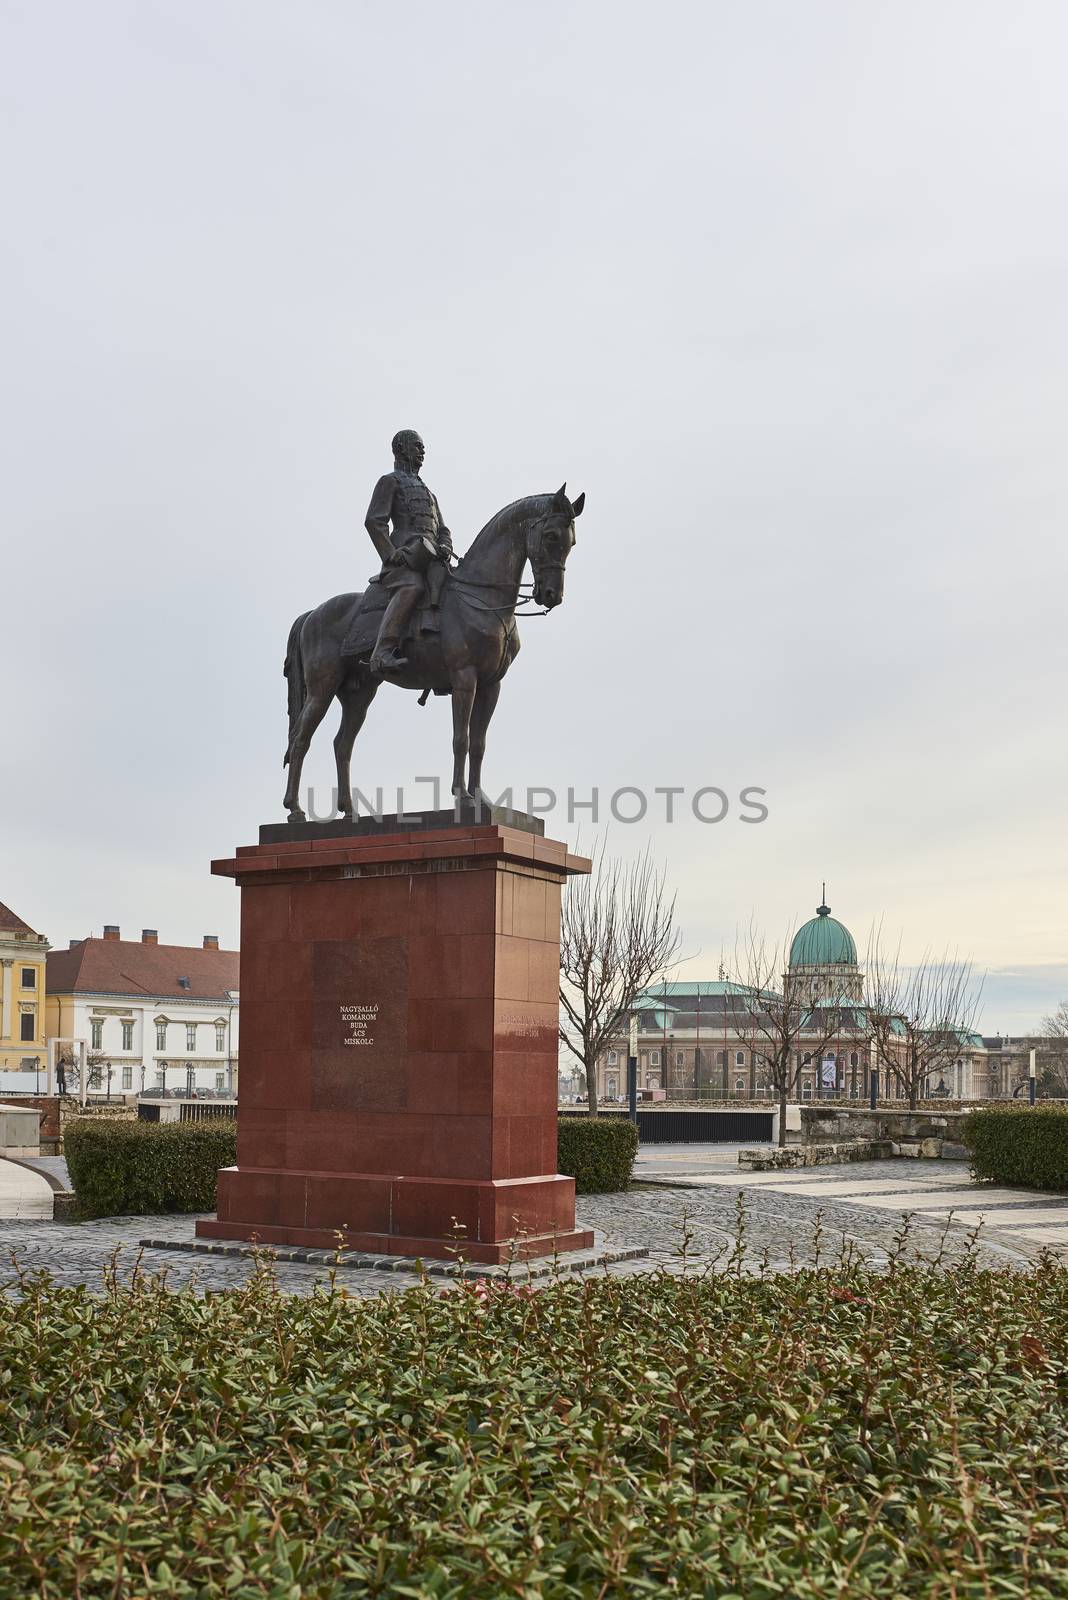 BUDAPEST, HUNGARY - FEBRUARY 02: Bronze statue of mounted military leader Artur Gorgey, with Buda Castle in the background. February 02, 2016 in Budapest.